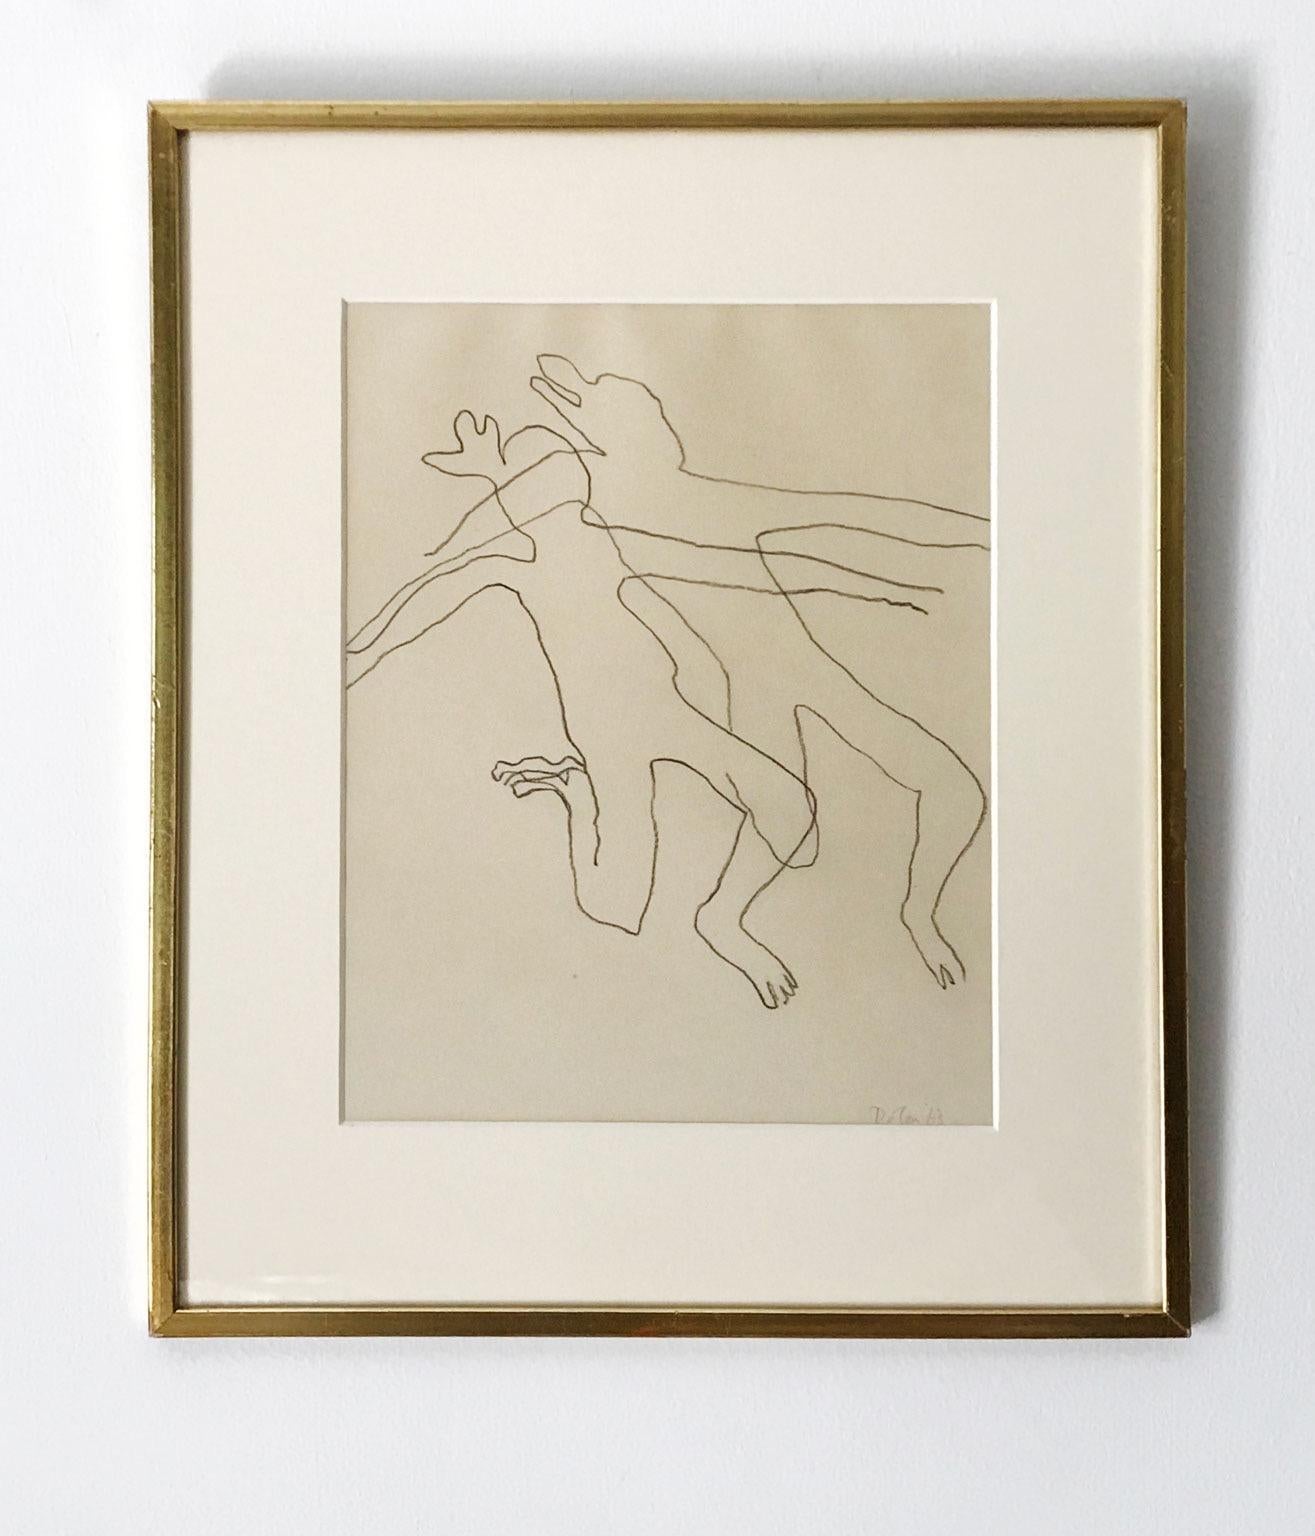 A pencil on paper sketch entitled 'Dancers' - signed and dated. Provenance: Queen Square Gallery, Leeds.

Framed in a gilt frame with labels verso.

Patrick Dolan (1926-1980)
Patrick Dolan was born in Ireland. He was an associate of Francis